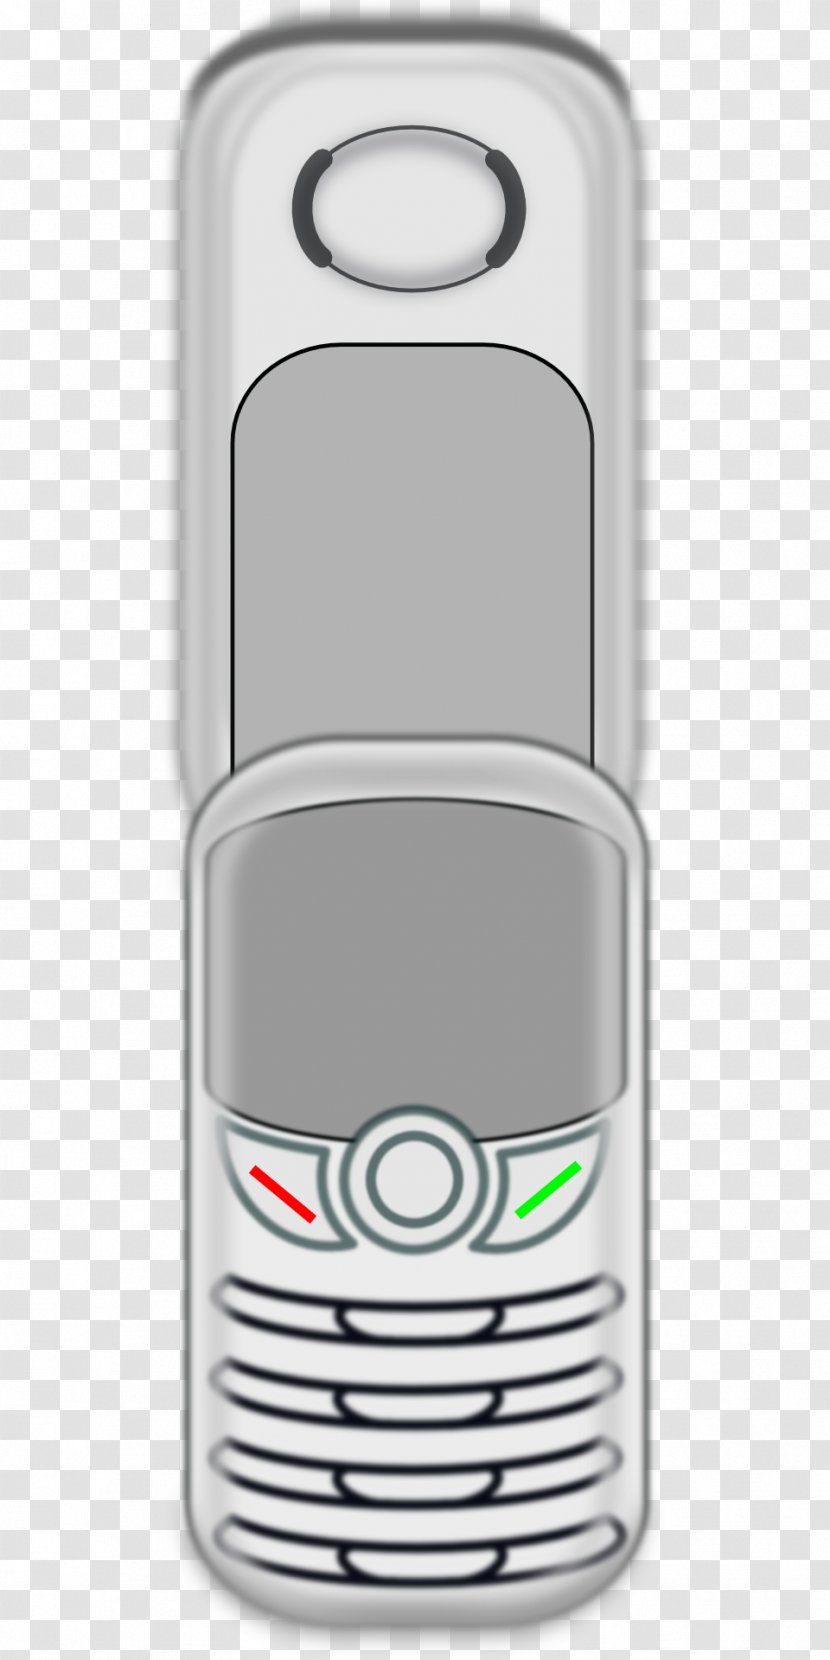 Mobile Phones Telephone Nokia - Communication Device - Cell Phone Transparent PNG